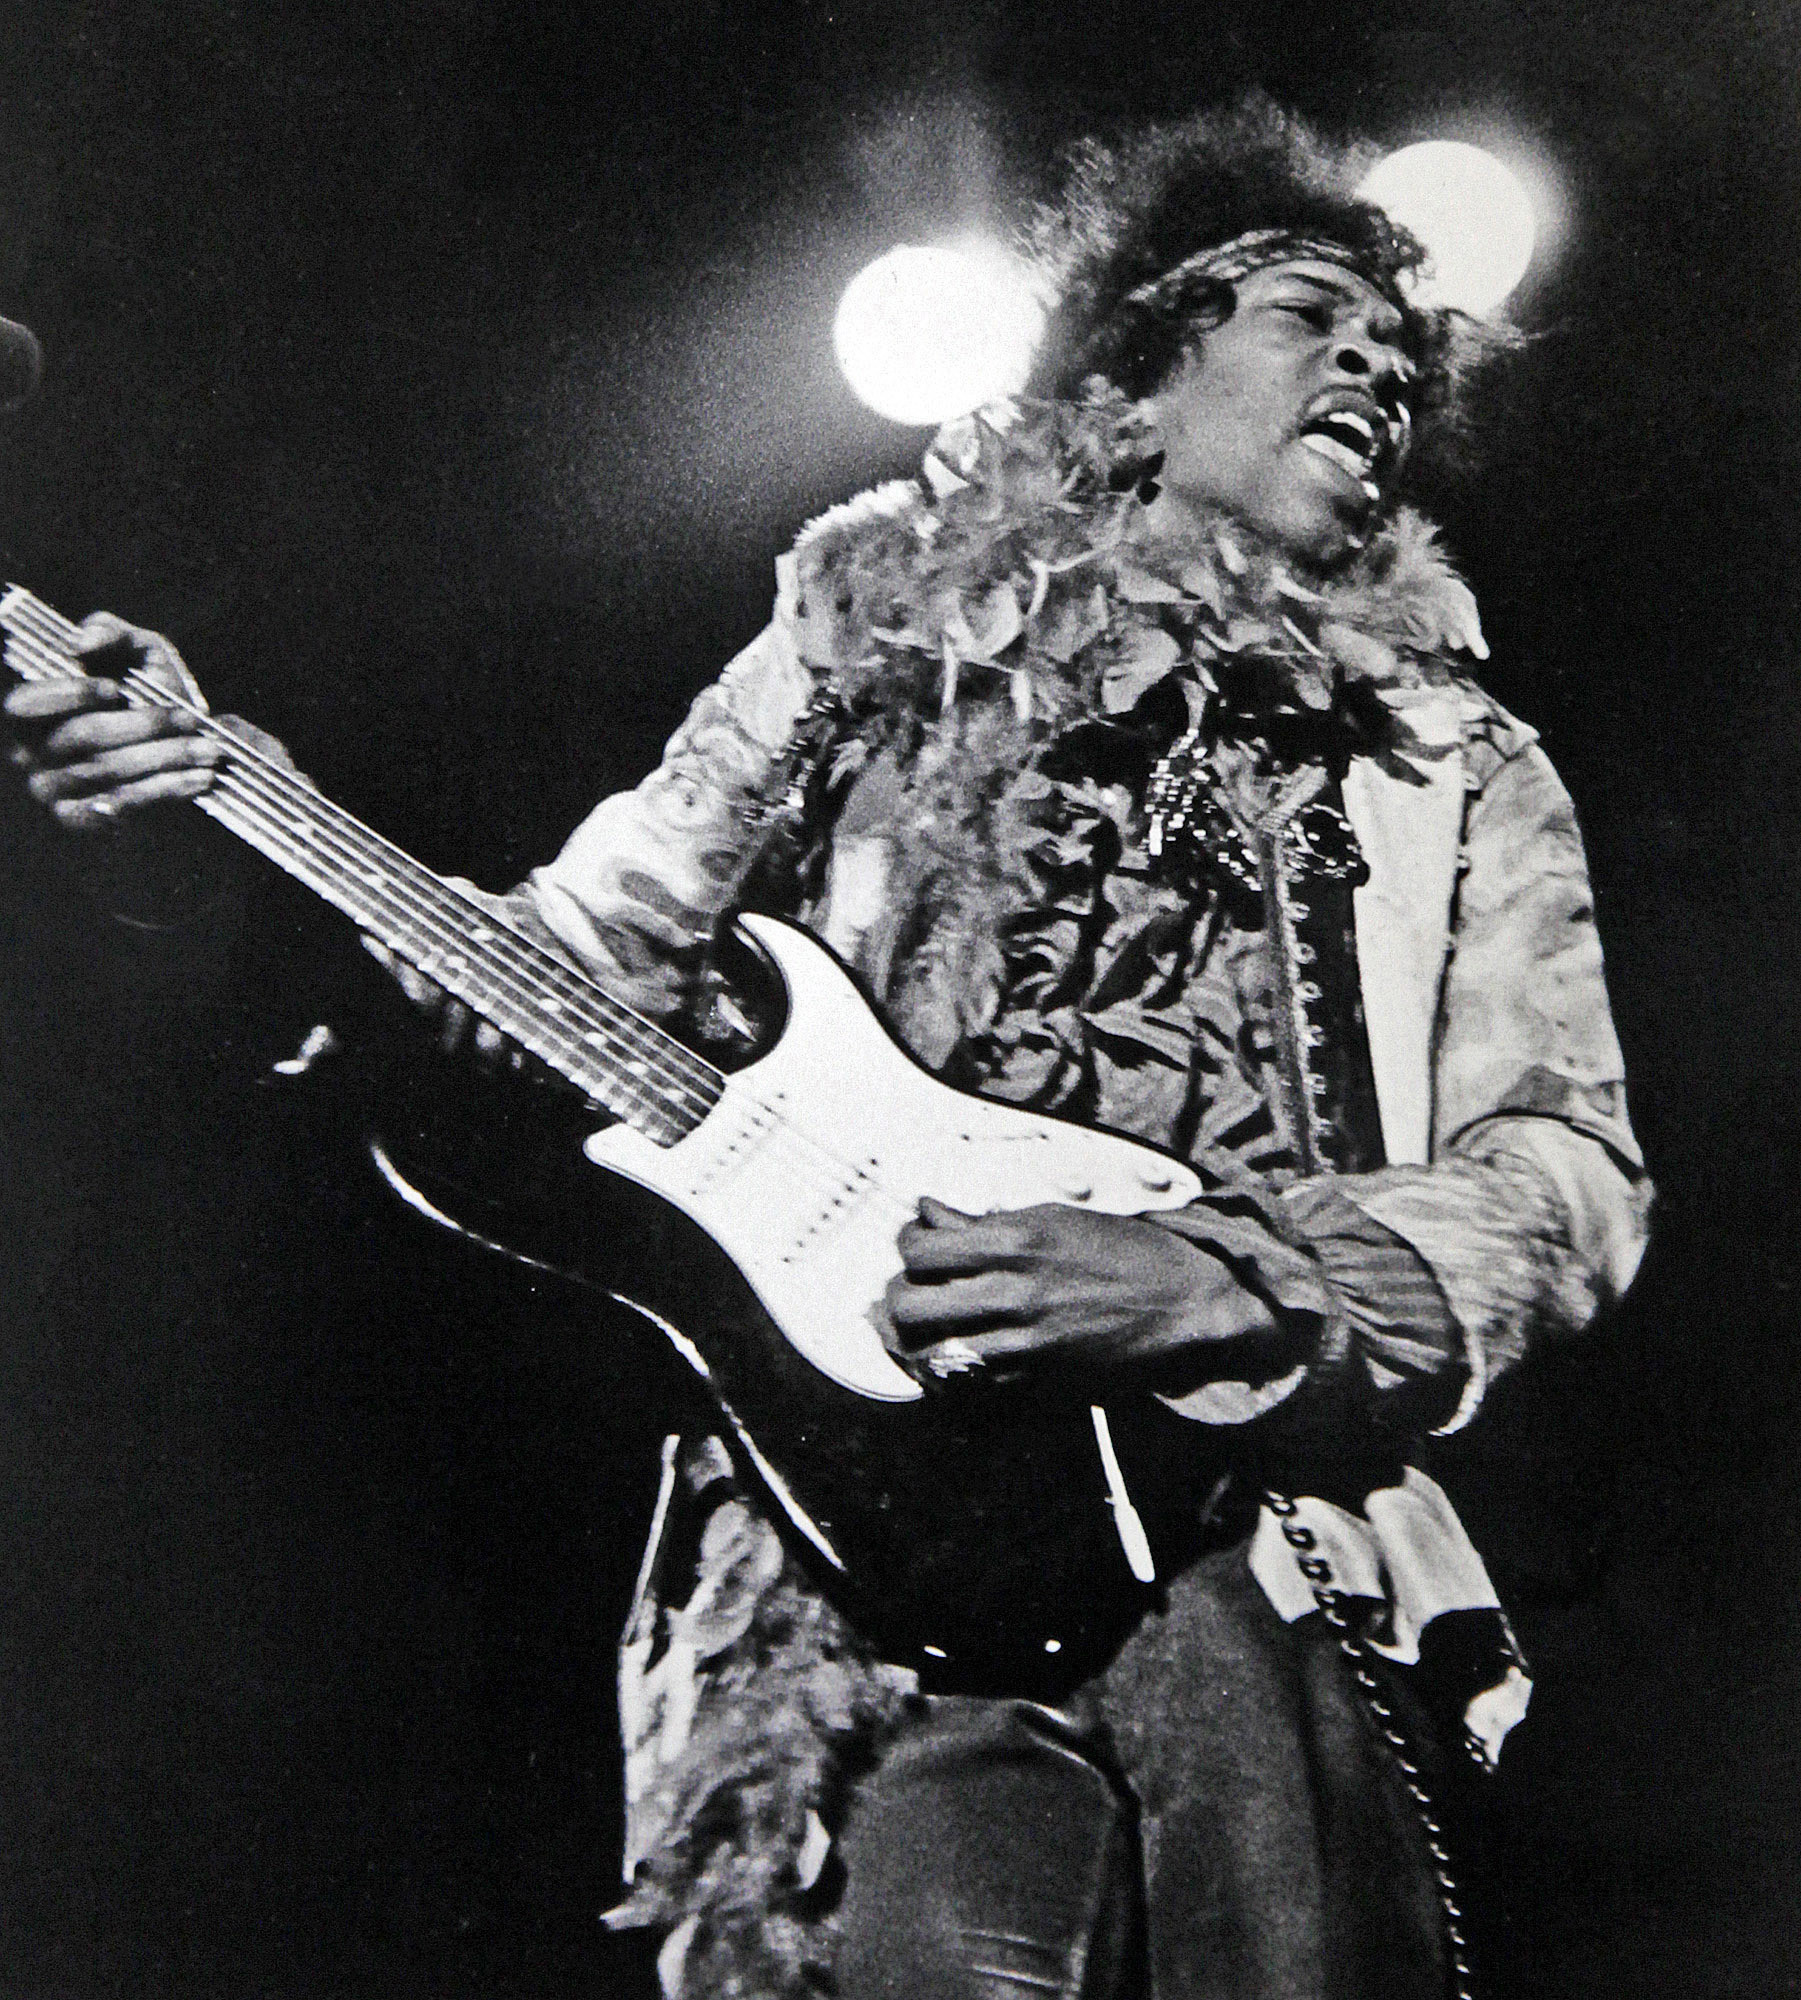 Backstage beefs, onstage magic: Monterey Pop 50 years later - Chicago